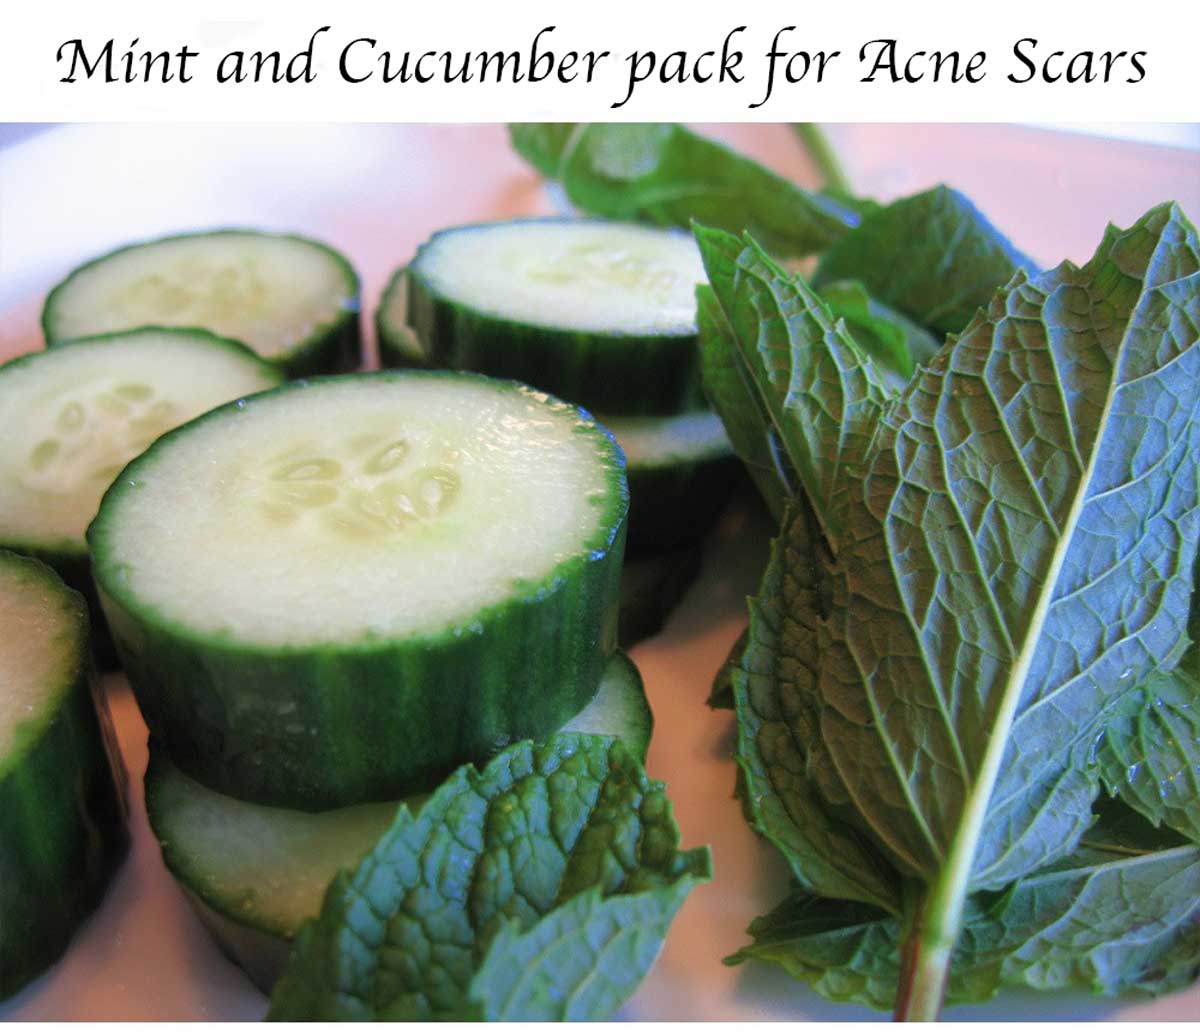 5 Ways to Use Mint Leaves to Reduce Acne Scars